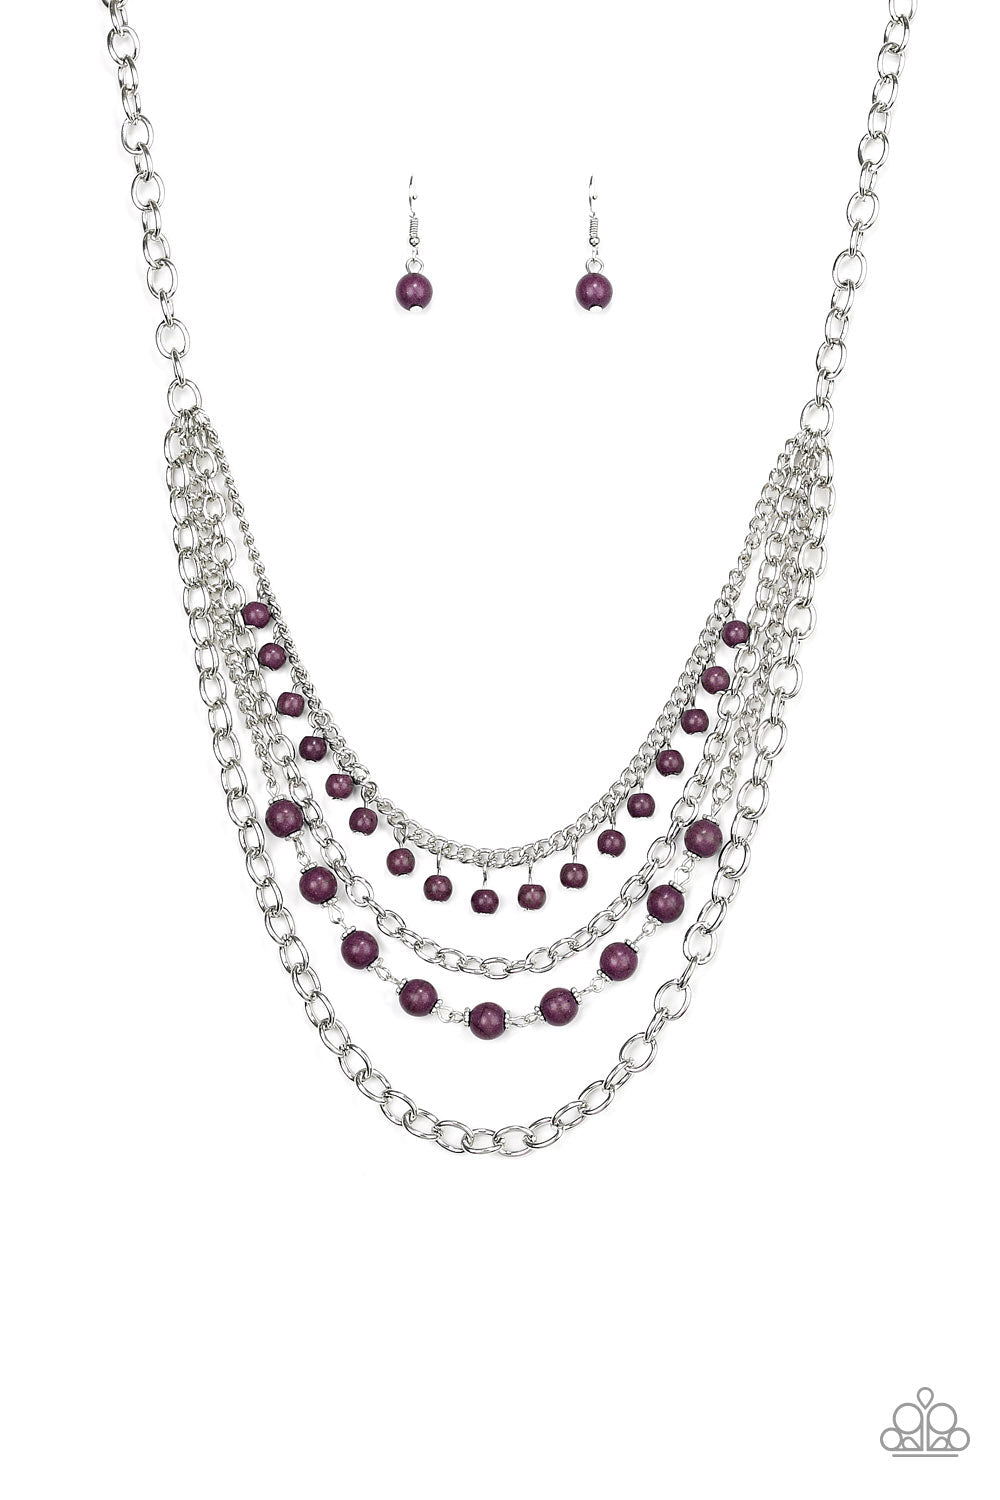 Ground Forces - Purple and Silver Necklace - Paparazzi Jewelry - Bejeweled Accessories By Kristie - Featuring vivacious purple stone accents, mismatched silver chains layer below the collar for a seasonal look. Features an adjustable clasp closure. Sold as one individual necklace.